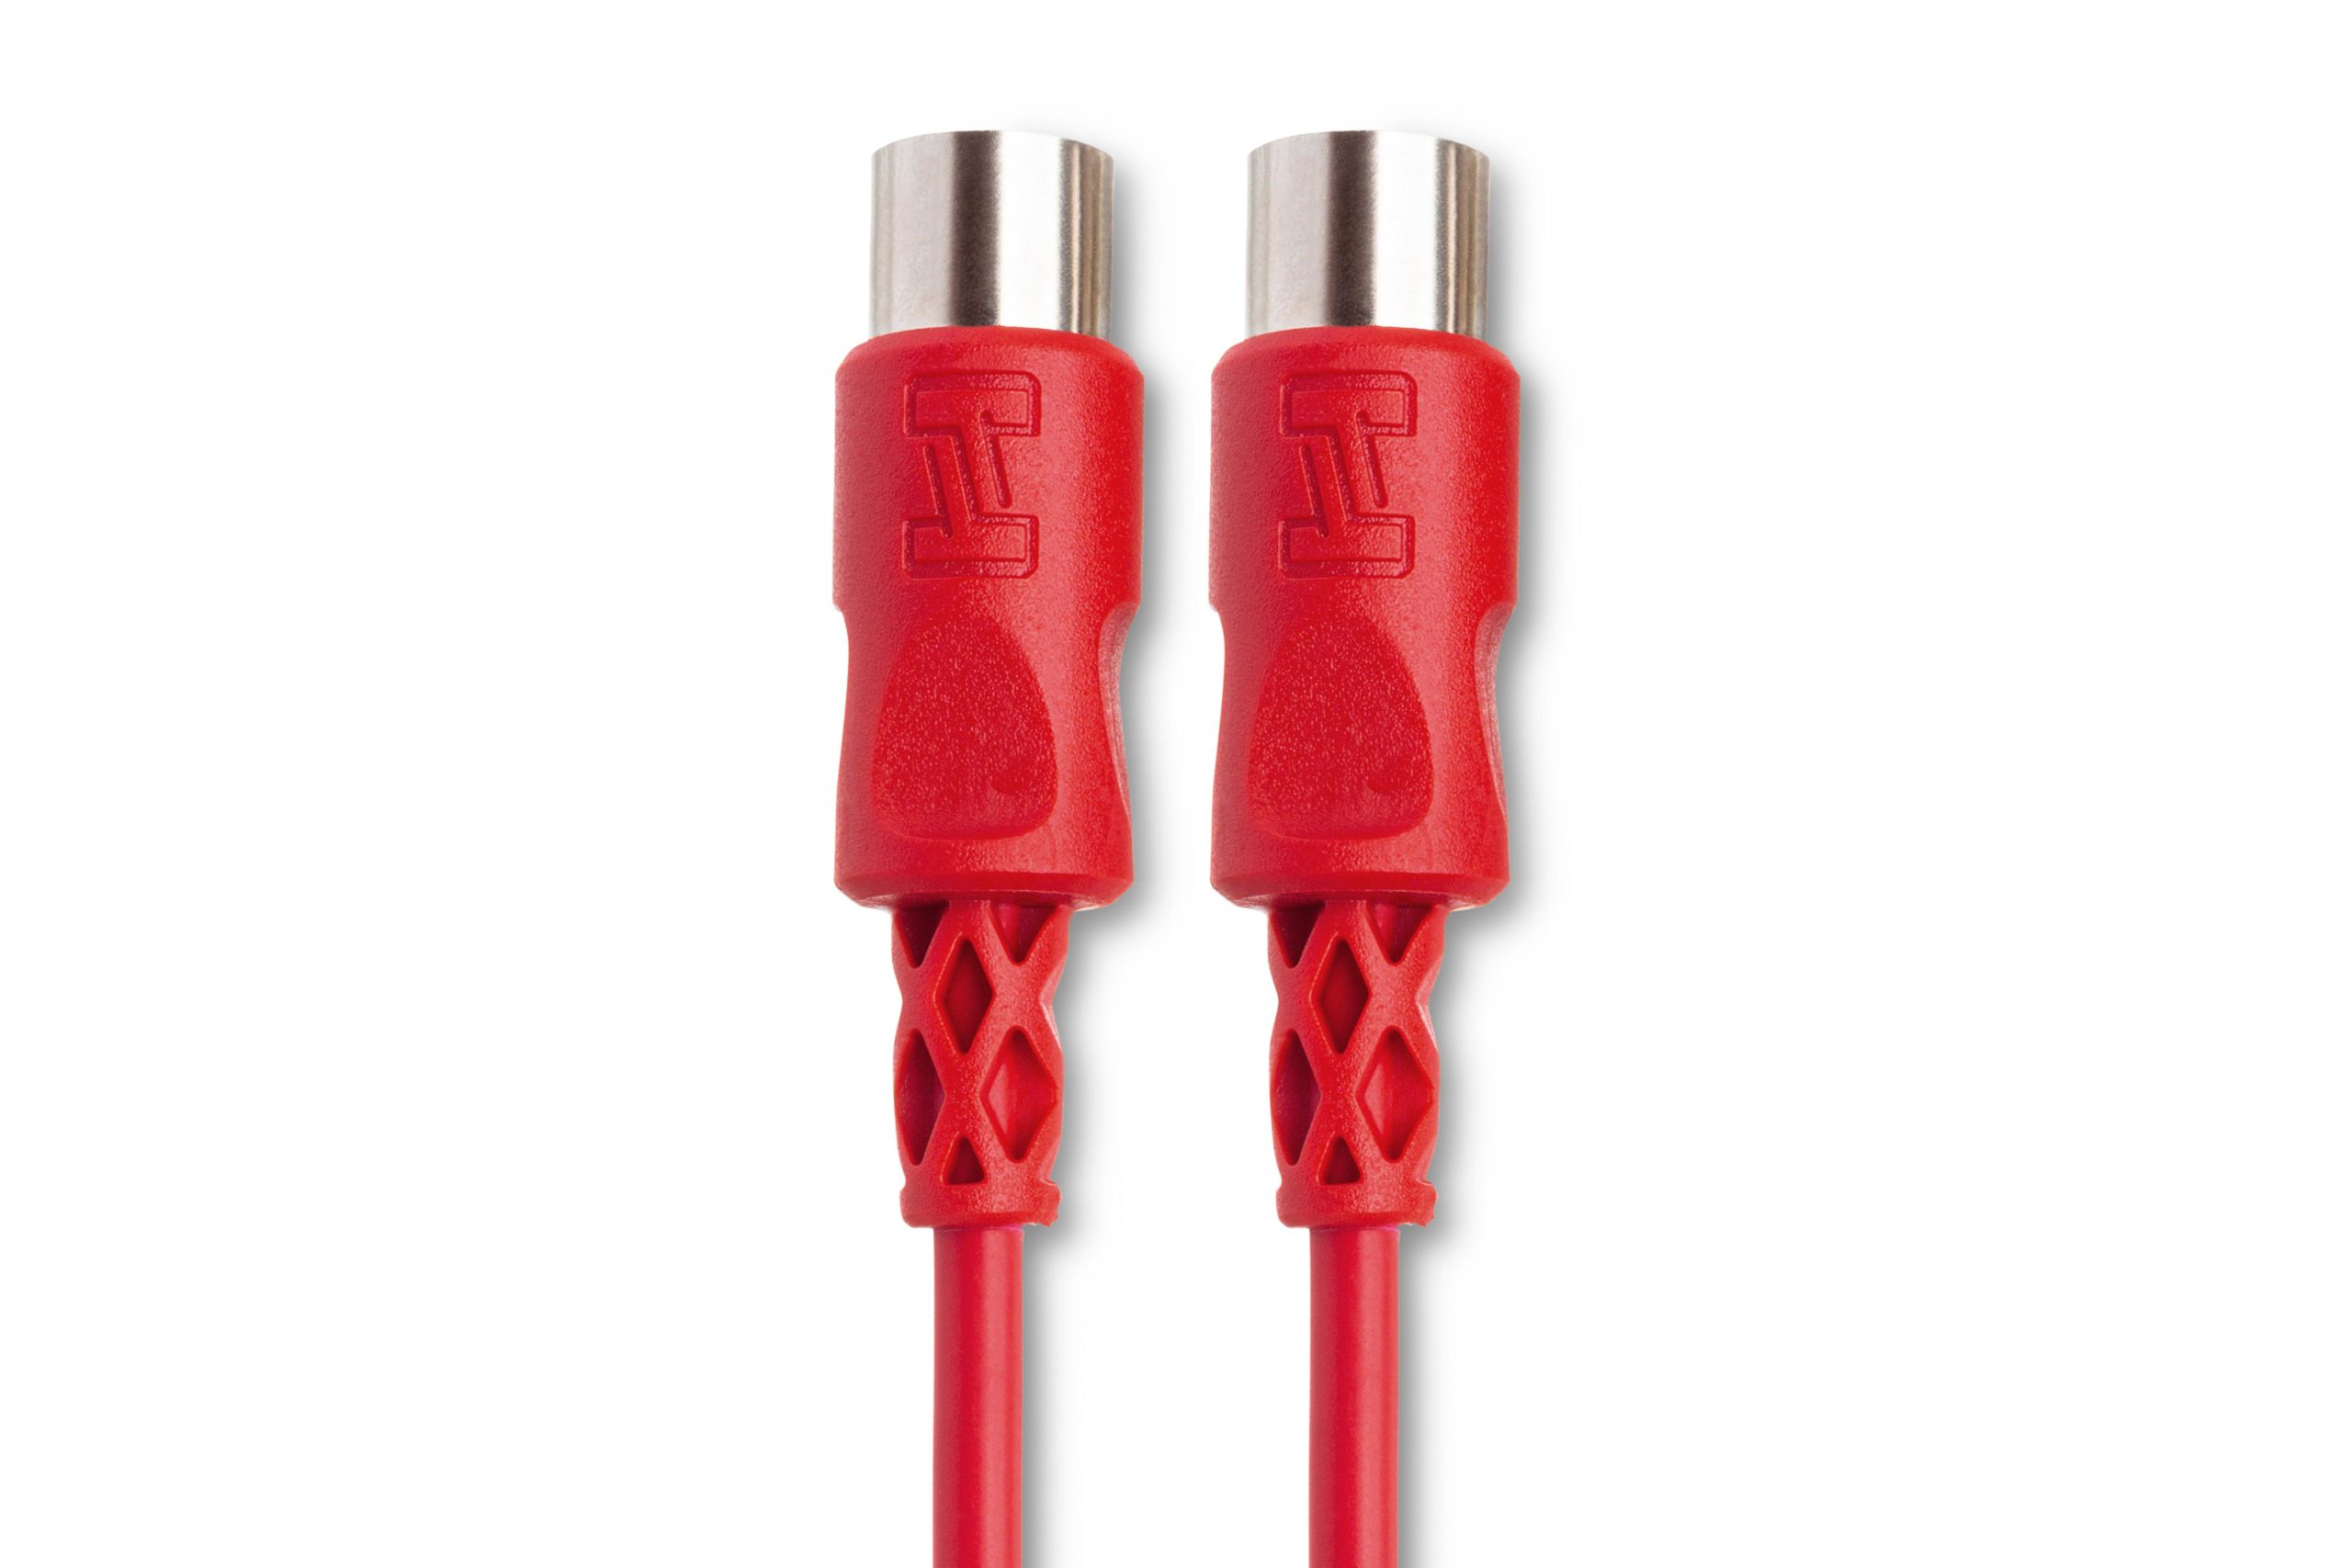 Buy Wholesale China 5 Pin Din Midi To Usb Cable With Led Indicator & Usb  Midi Adapter Cable at USD 3